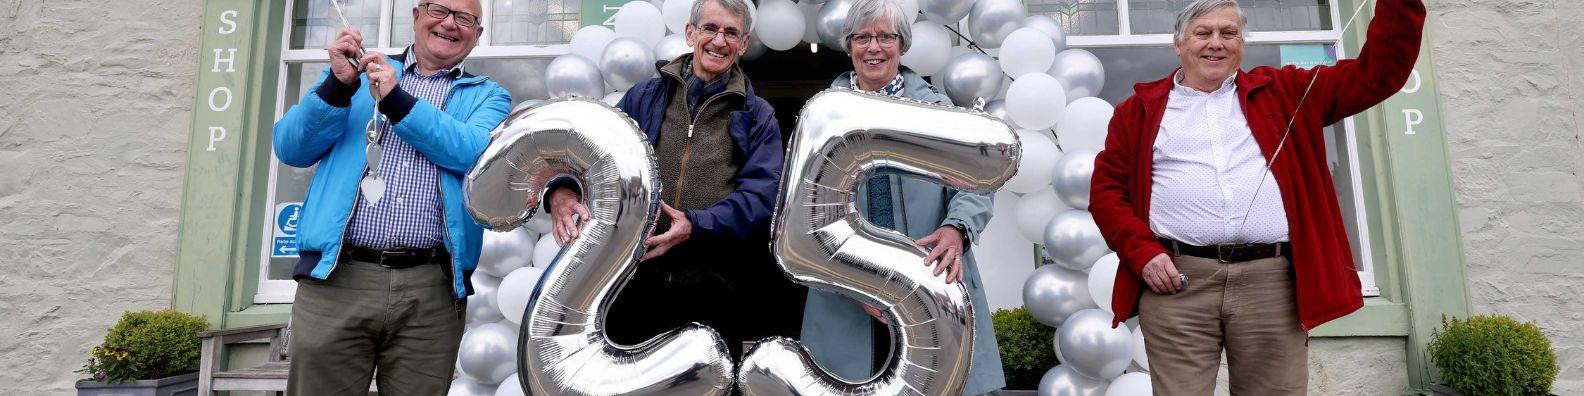 Four people standing in front of  Mercat Cross, Wigtown, holding silver balloons for the twenty fifth anniversary of Wigtown's Book Festival.